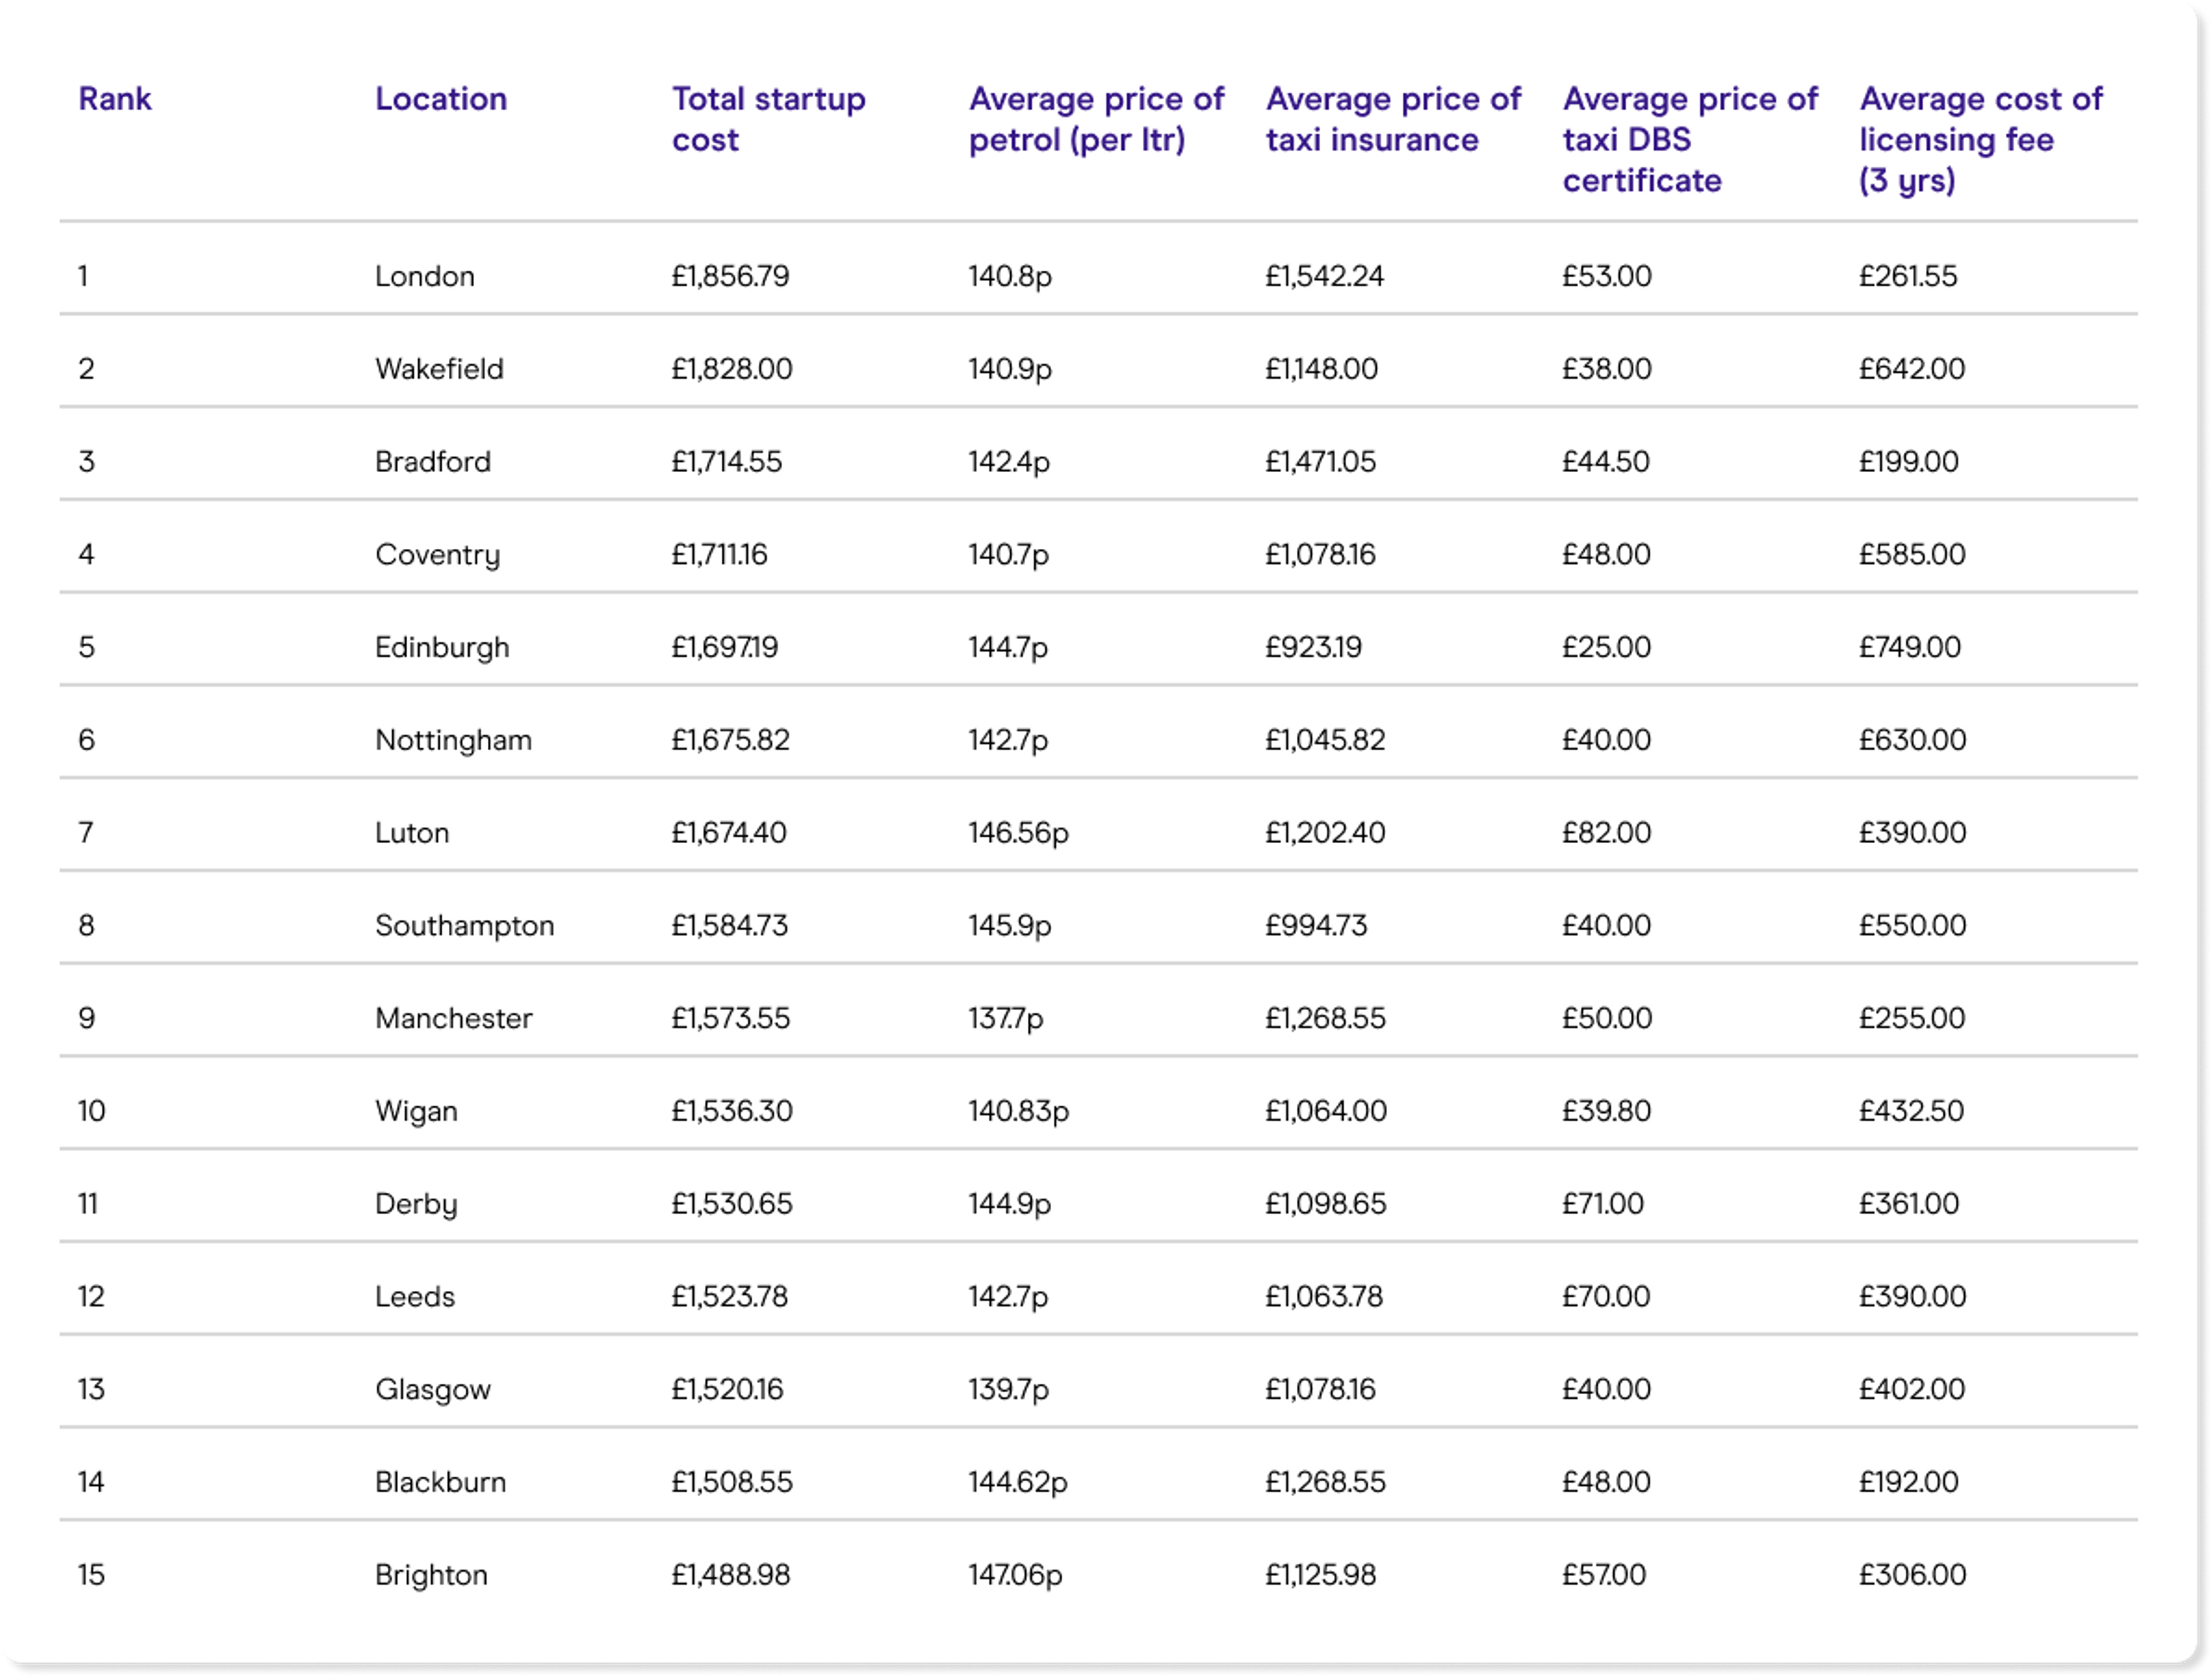 The UK’s most expensive cities for taxi driver